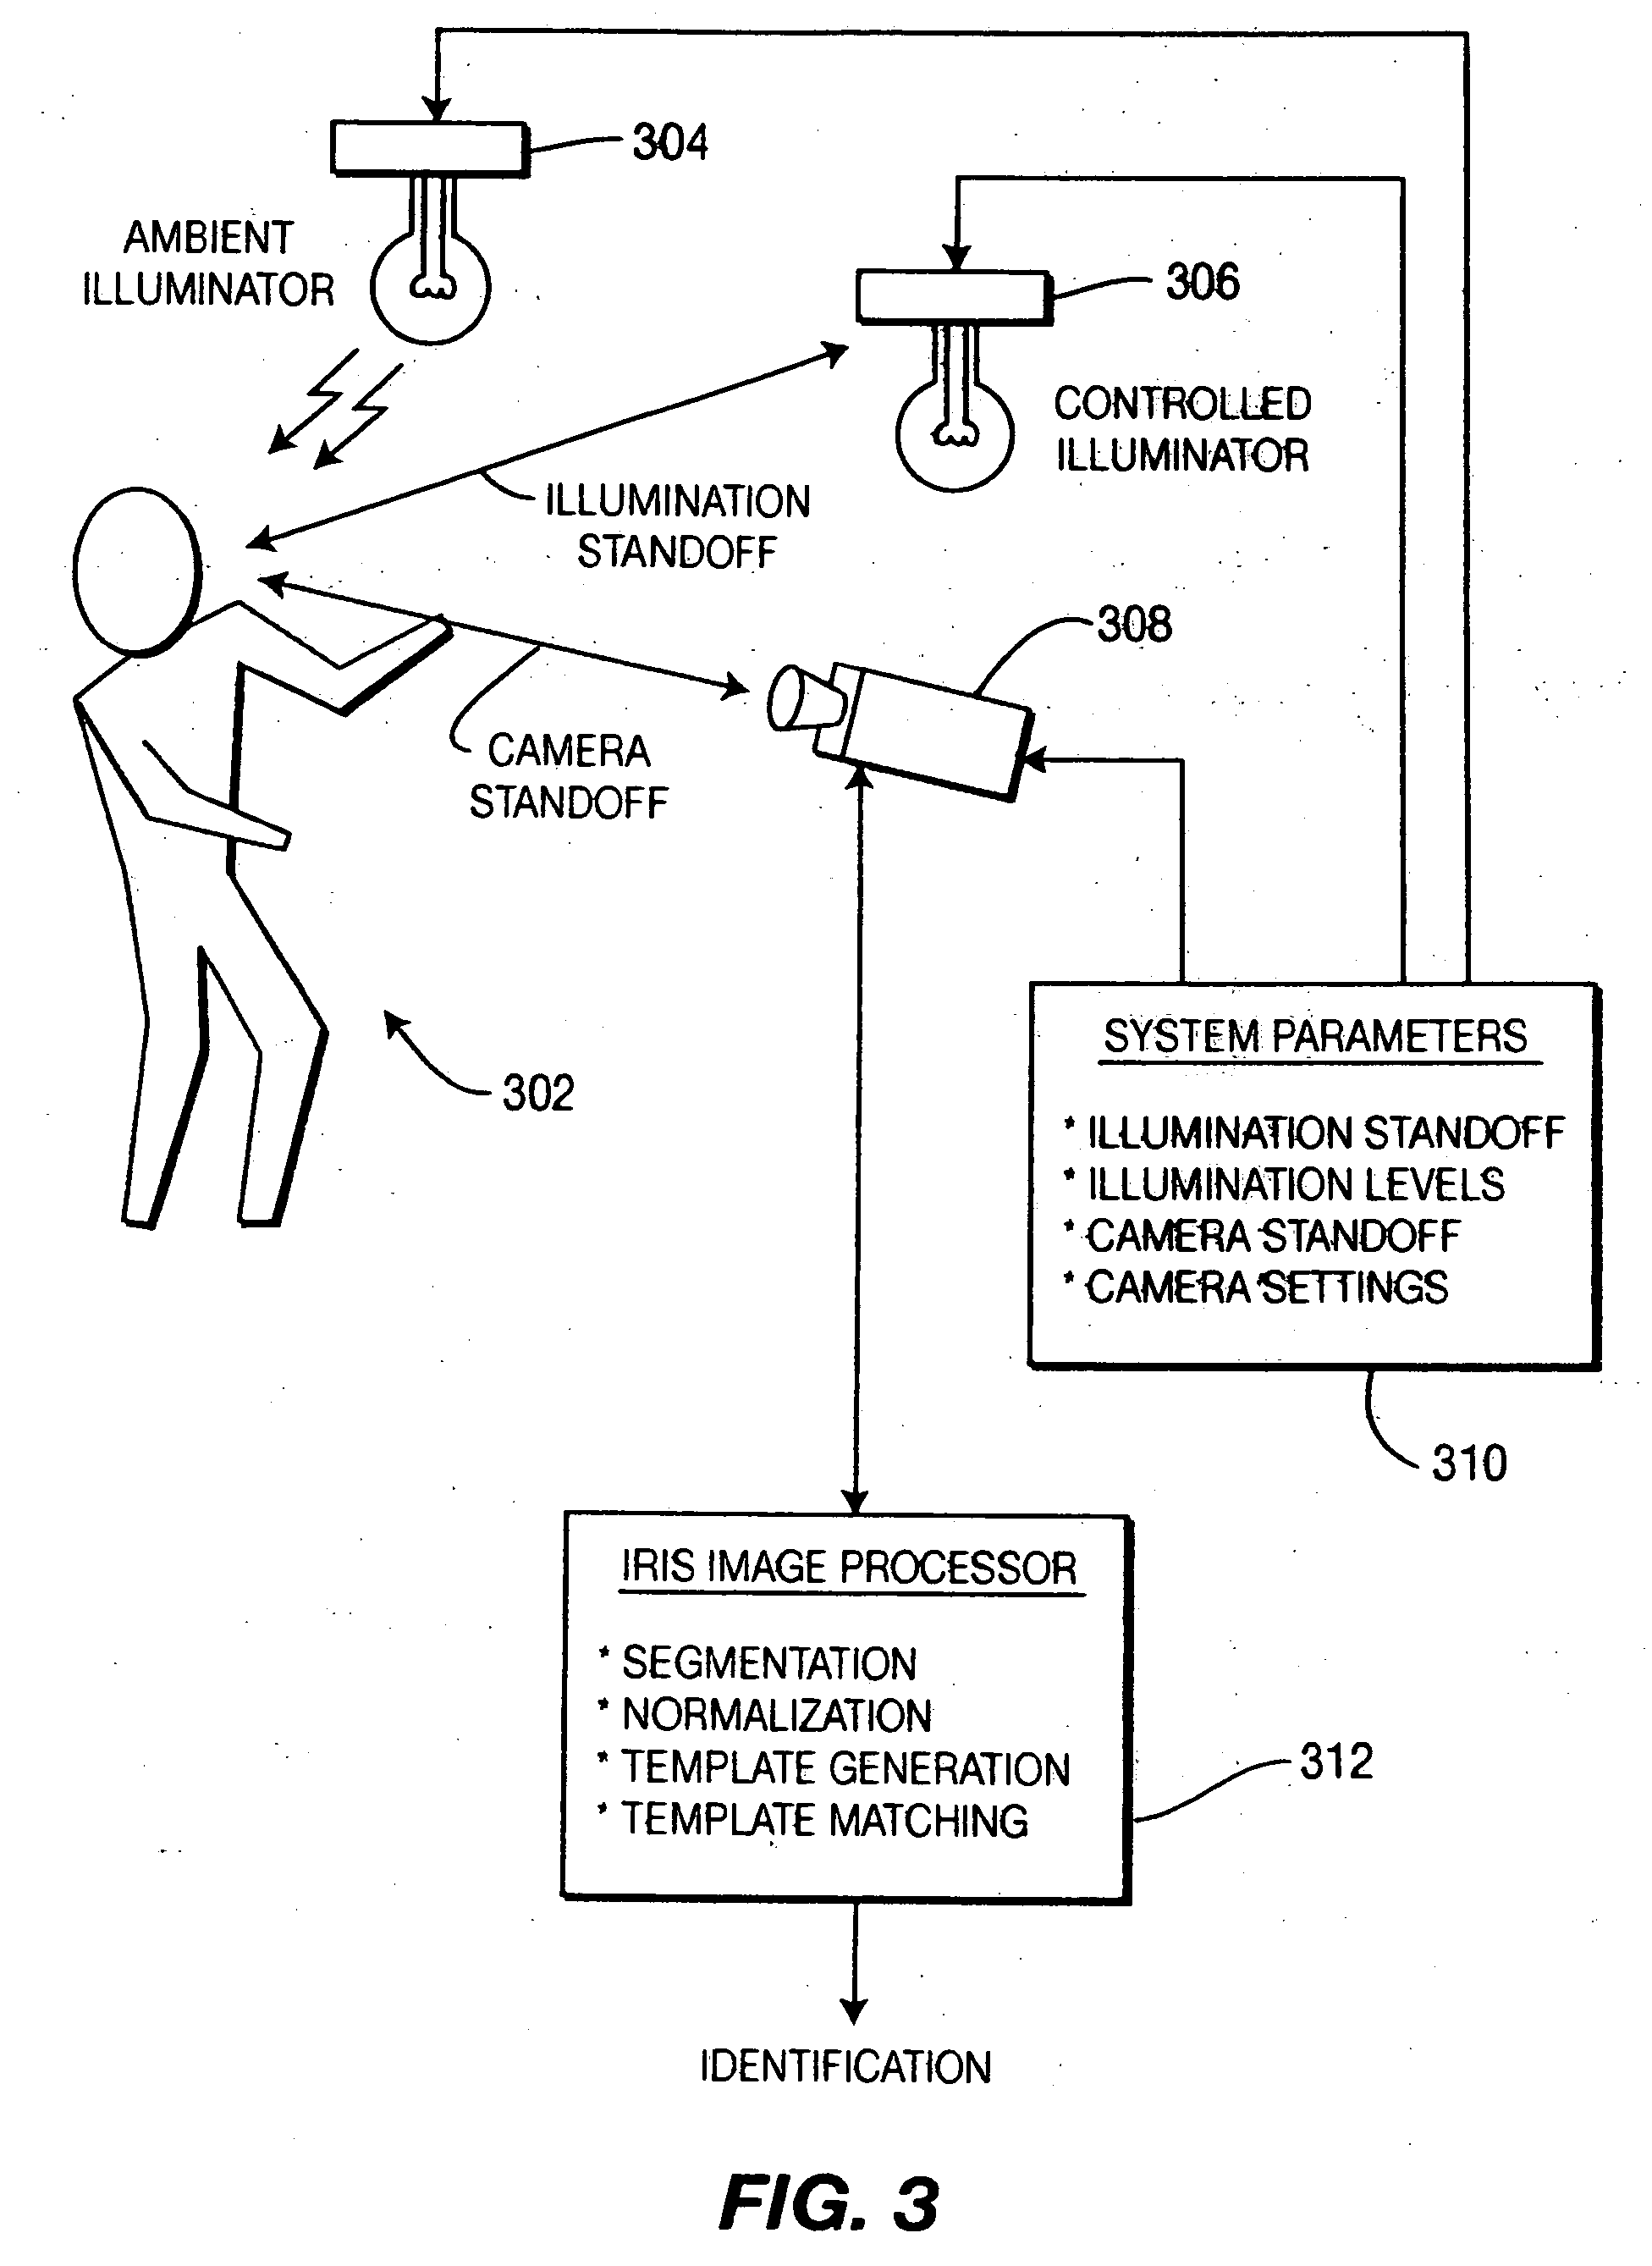 Method and apparatus for designing iris biometric systems for use in minimally constrained settings